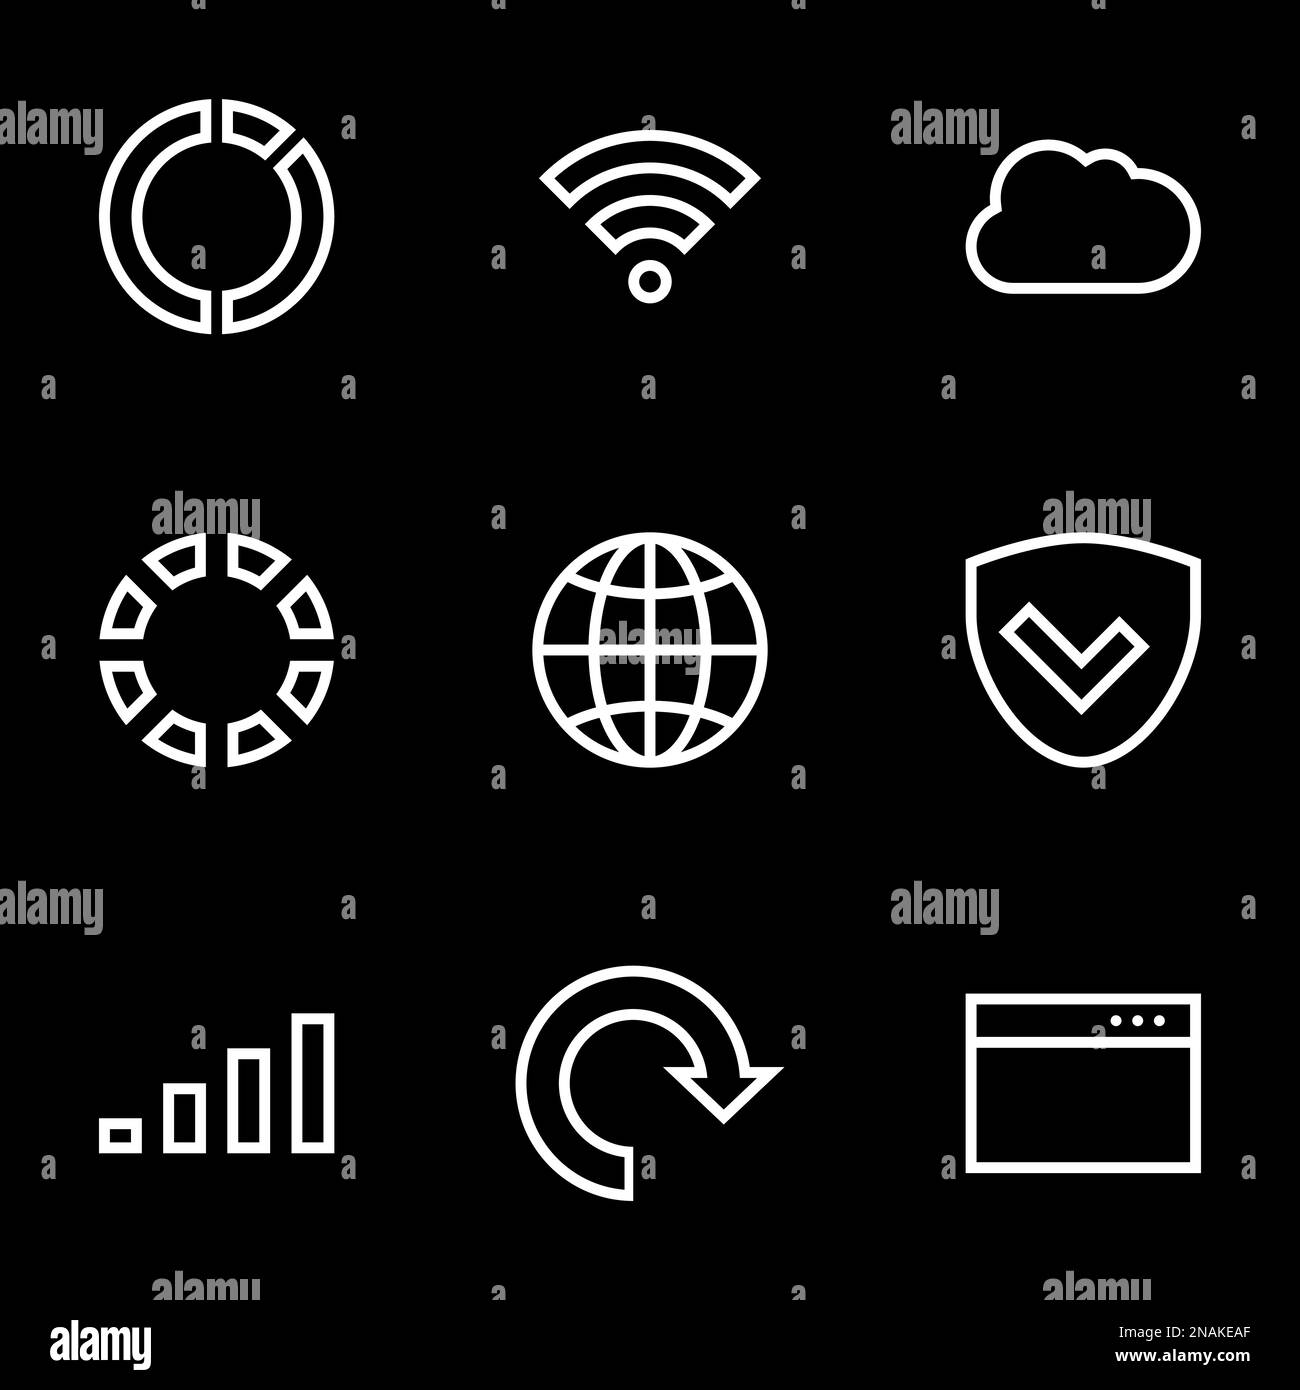 Set of simple icons on a theme Web, internet, communication, linear , vector, set. Black background Stock Vector